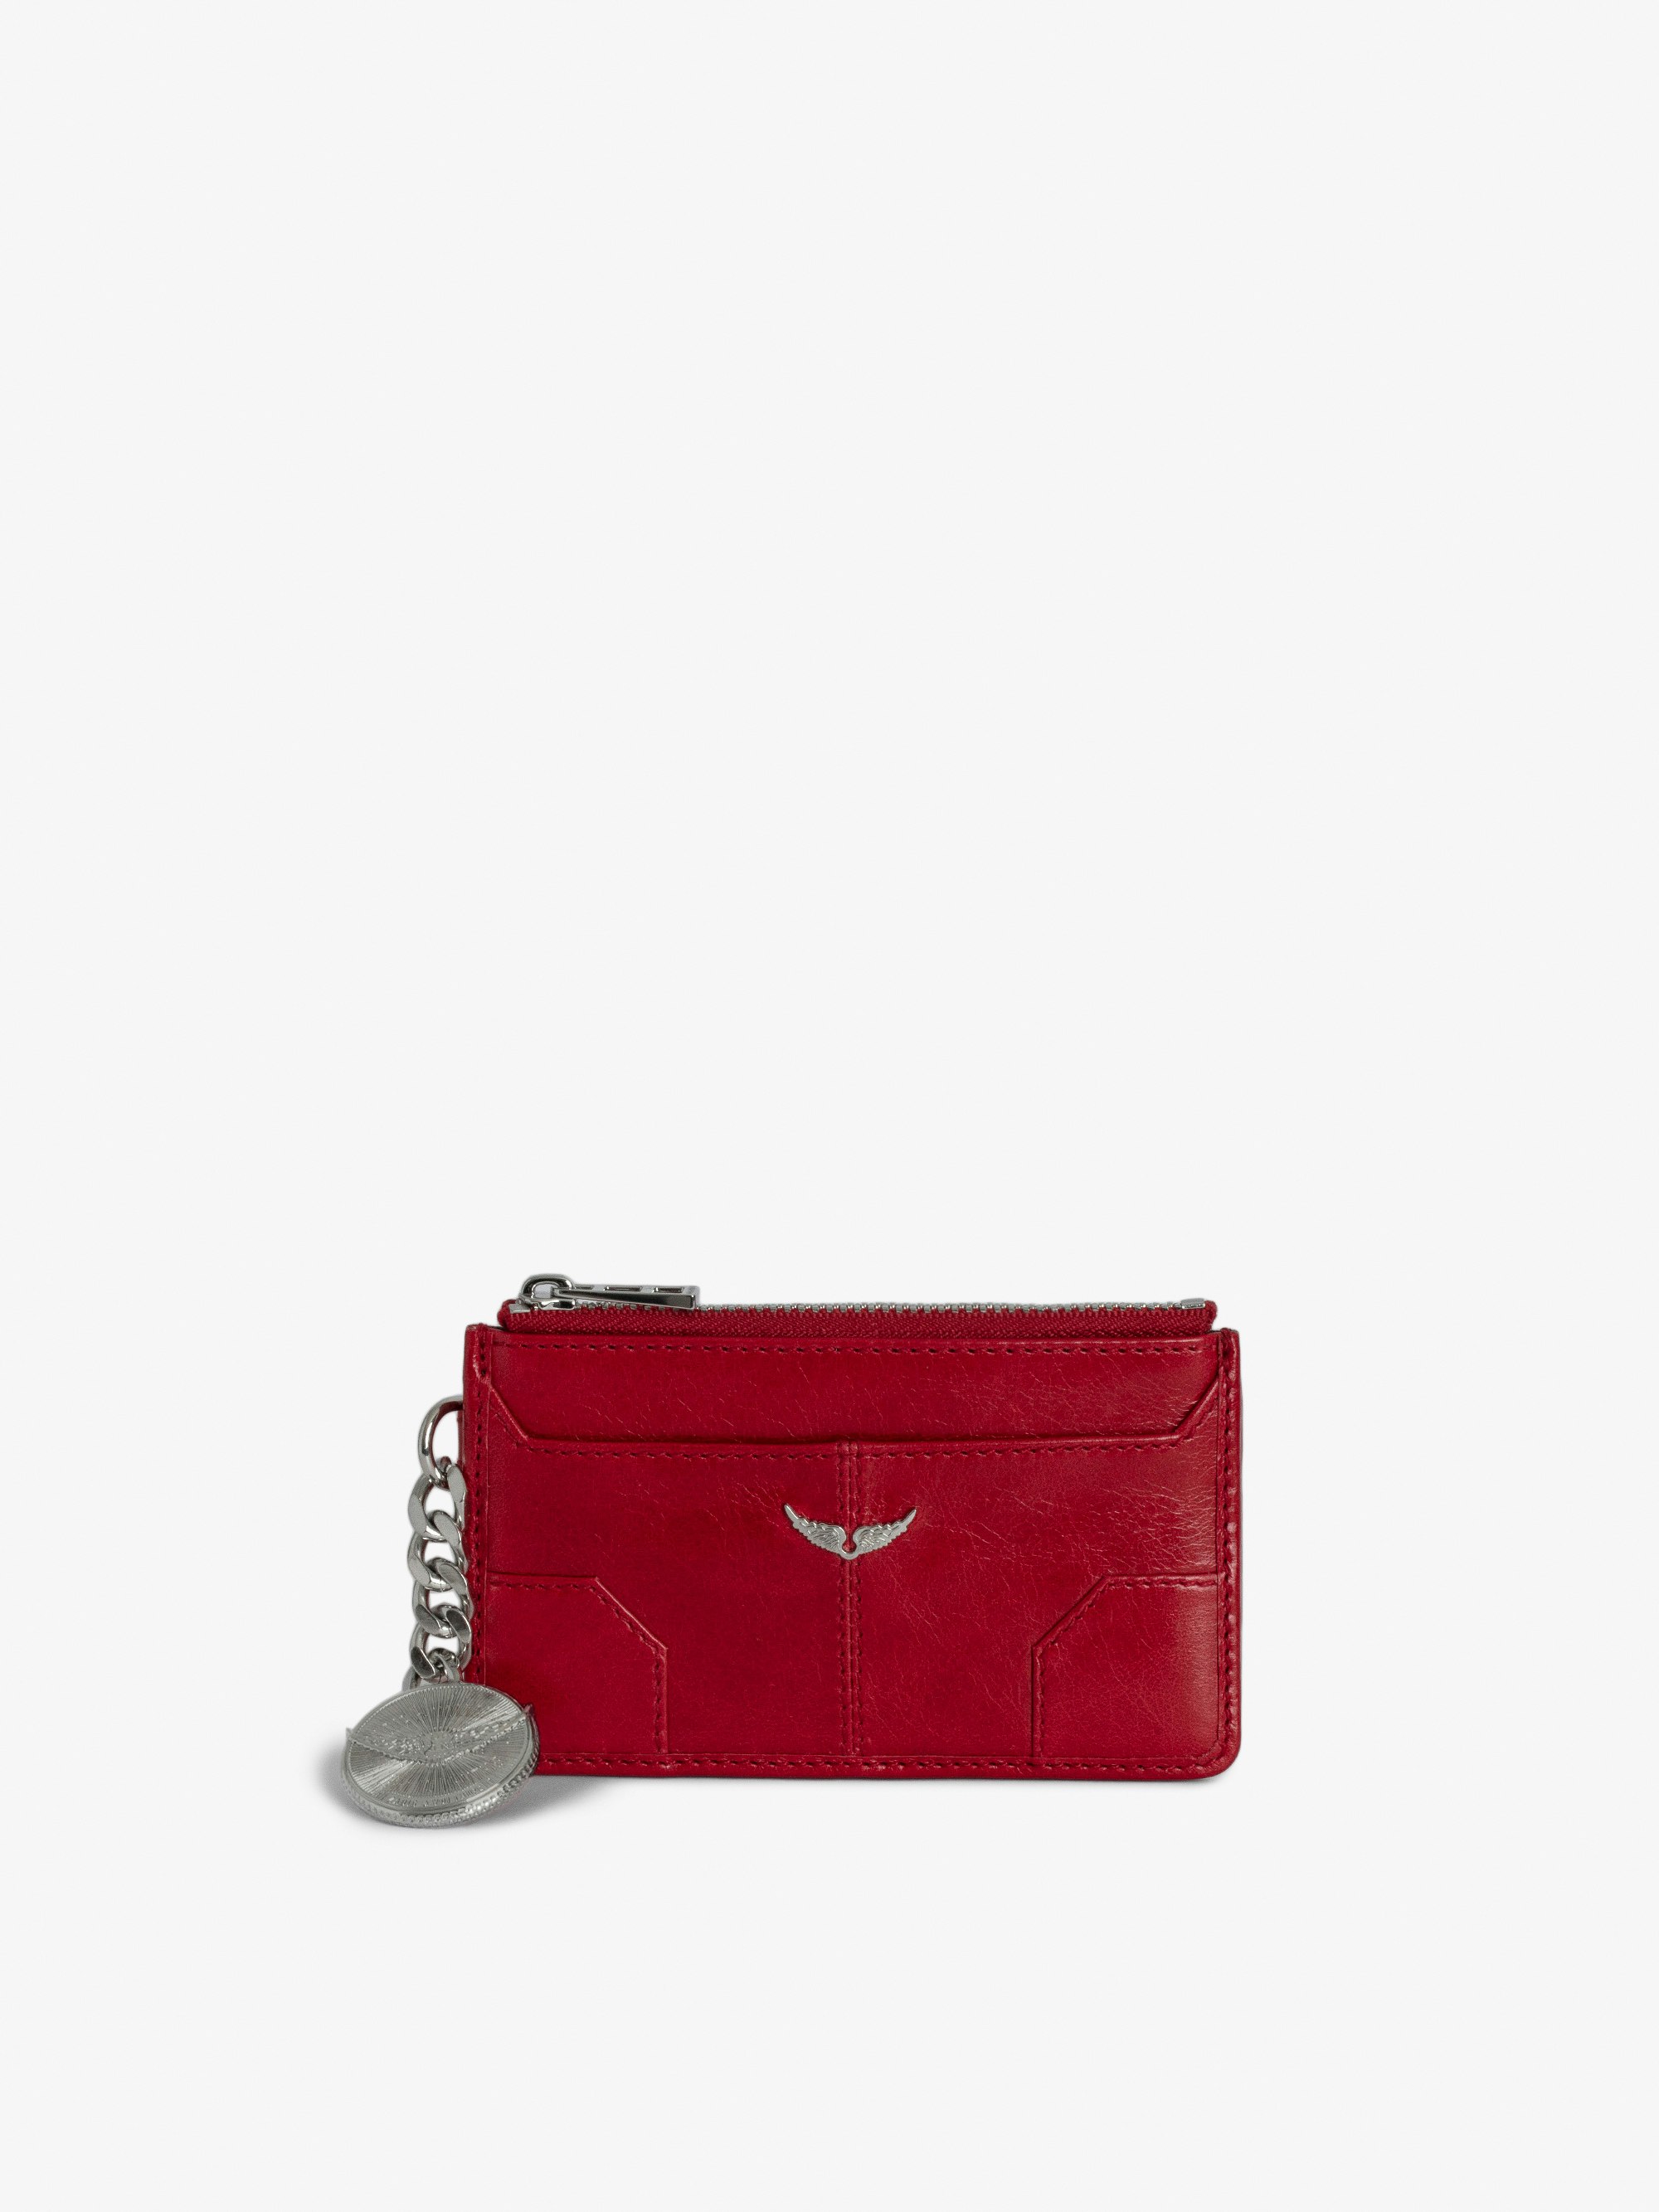 Sunny Card Card Holder - Vintage-effect patent leather card holder with medallion and signature wings.